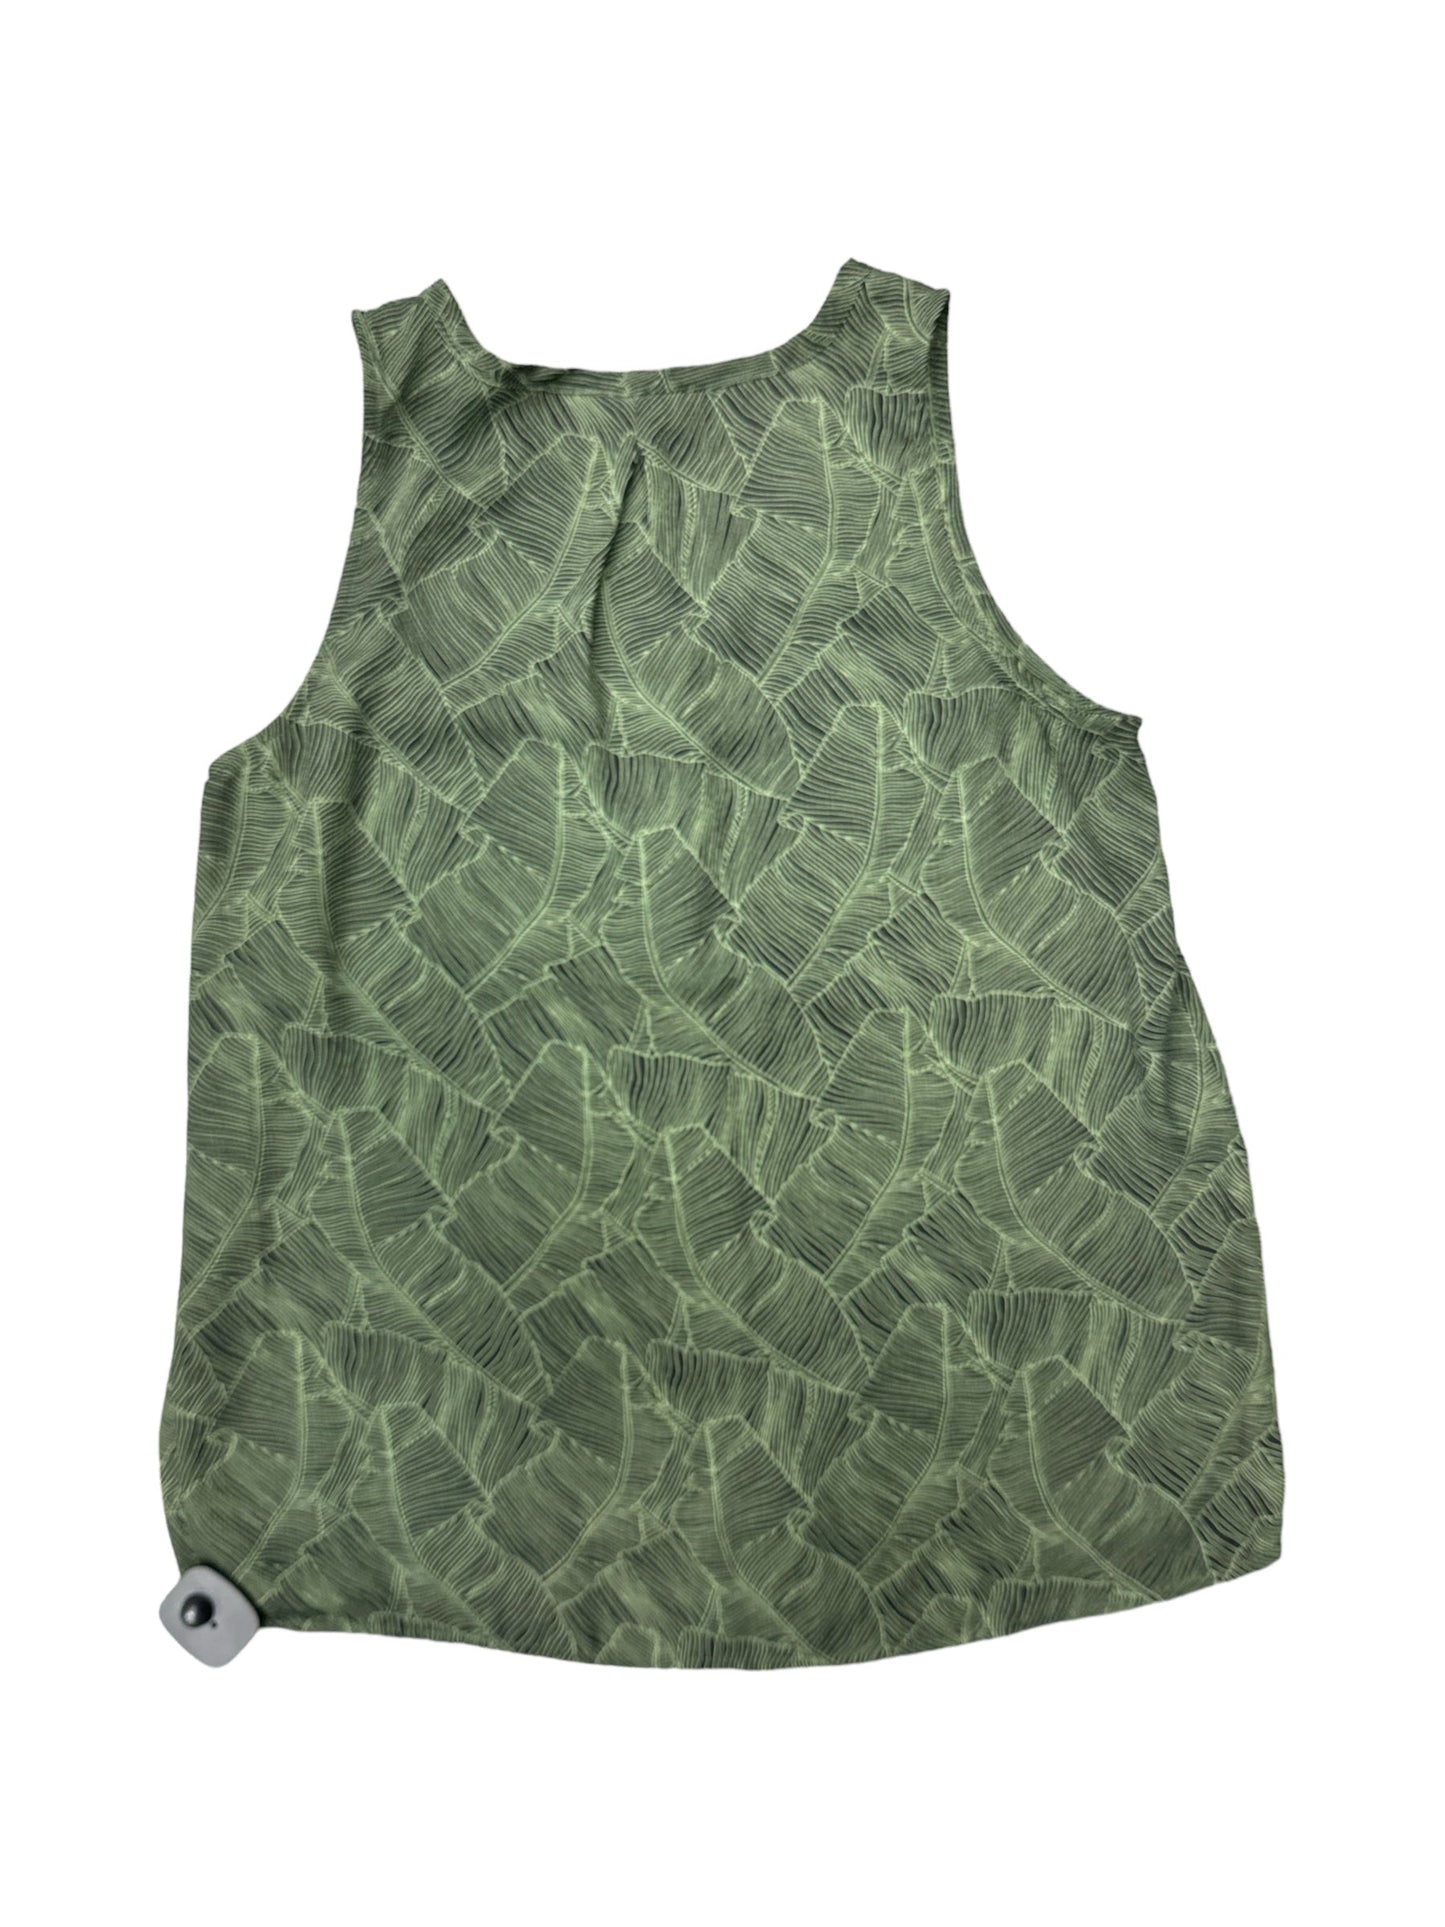 Green Tank Top Braeve, Size S